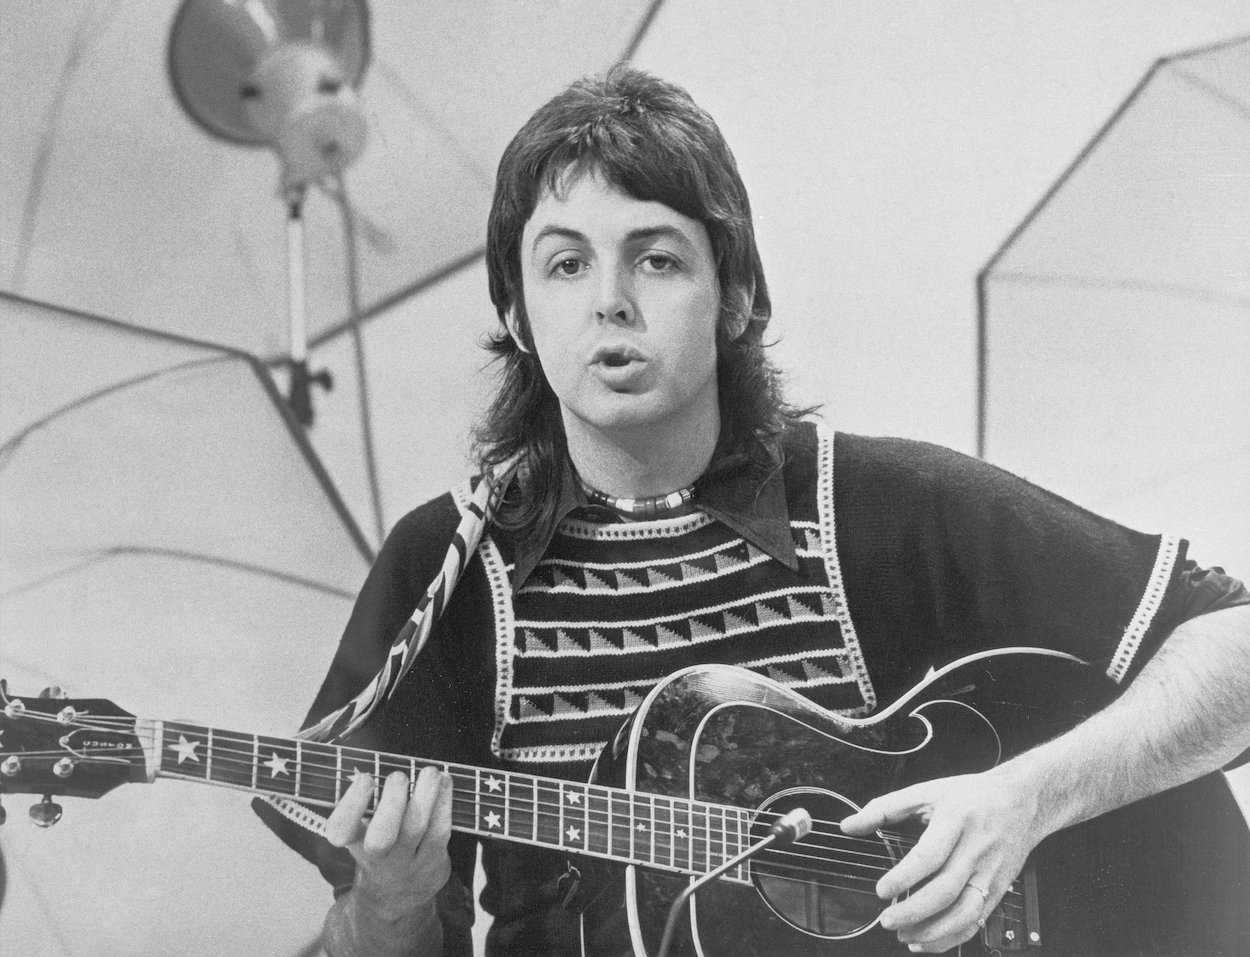 Paul McCartney plays guitar while filming a 1973 TV special. McCartney once wrote a song about Picasso's last words when a famous actor urged him to, and it ended up on a hit album.